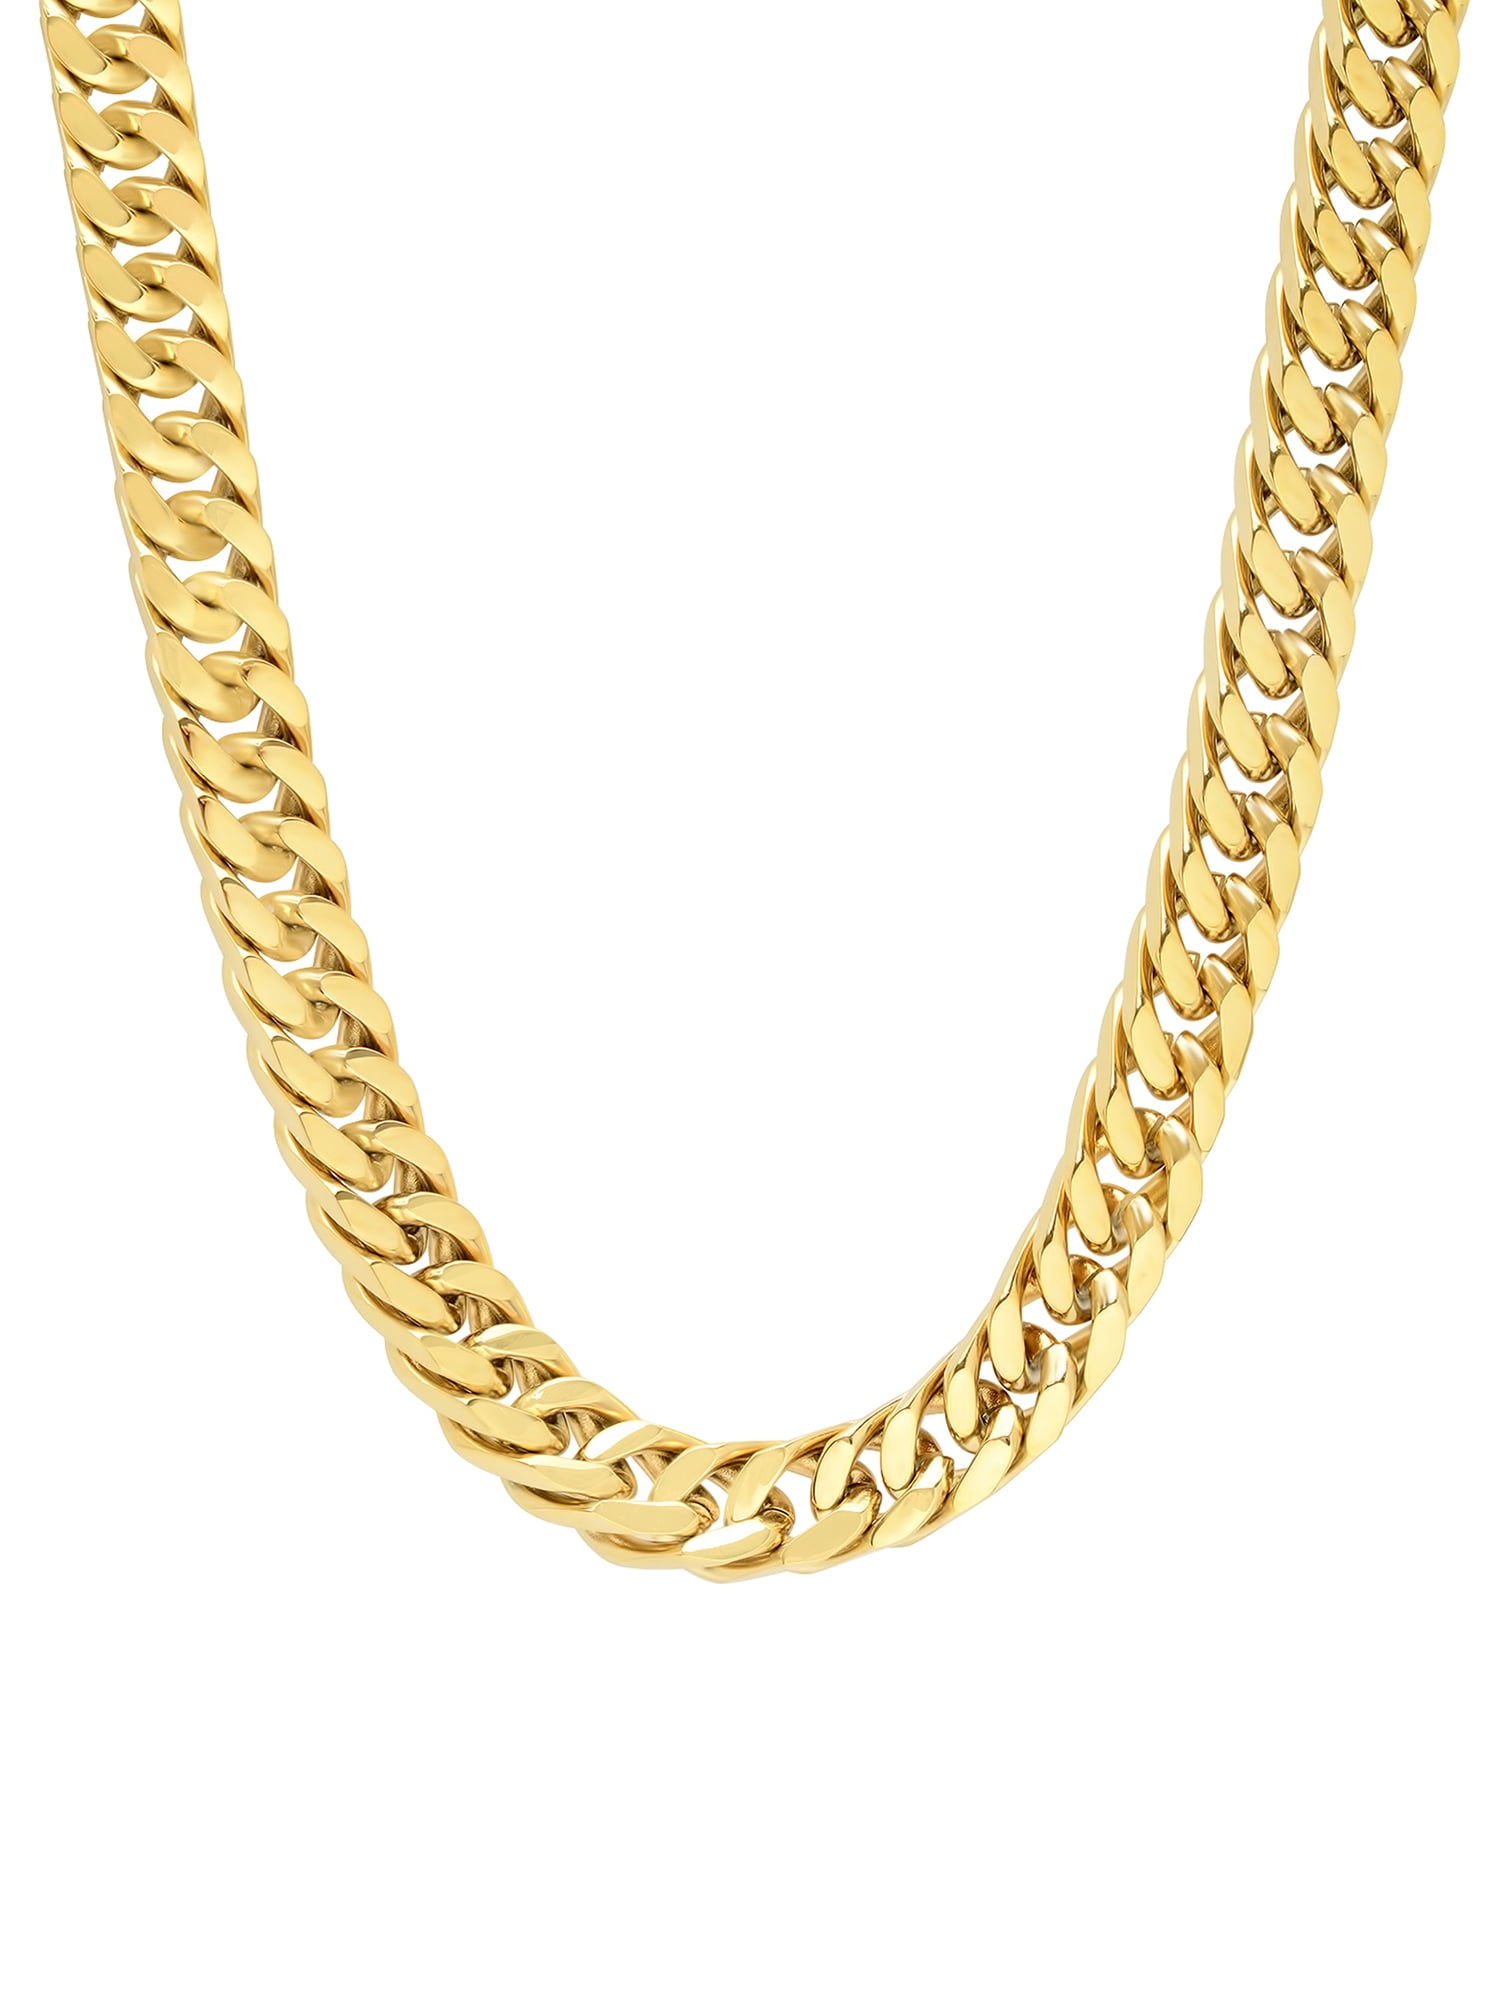 18K IP Yellow Gold Solid 316L Stainless Steel Round BOX CHAIN Link Mens Necklace 